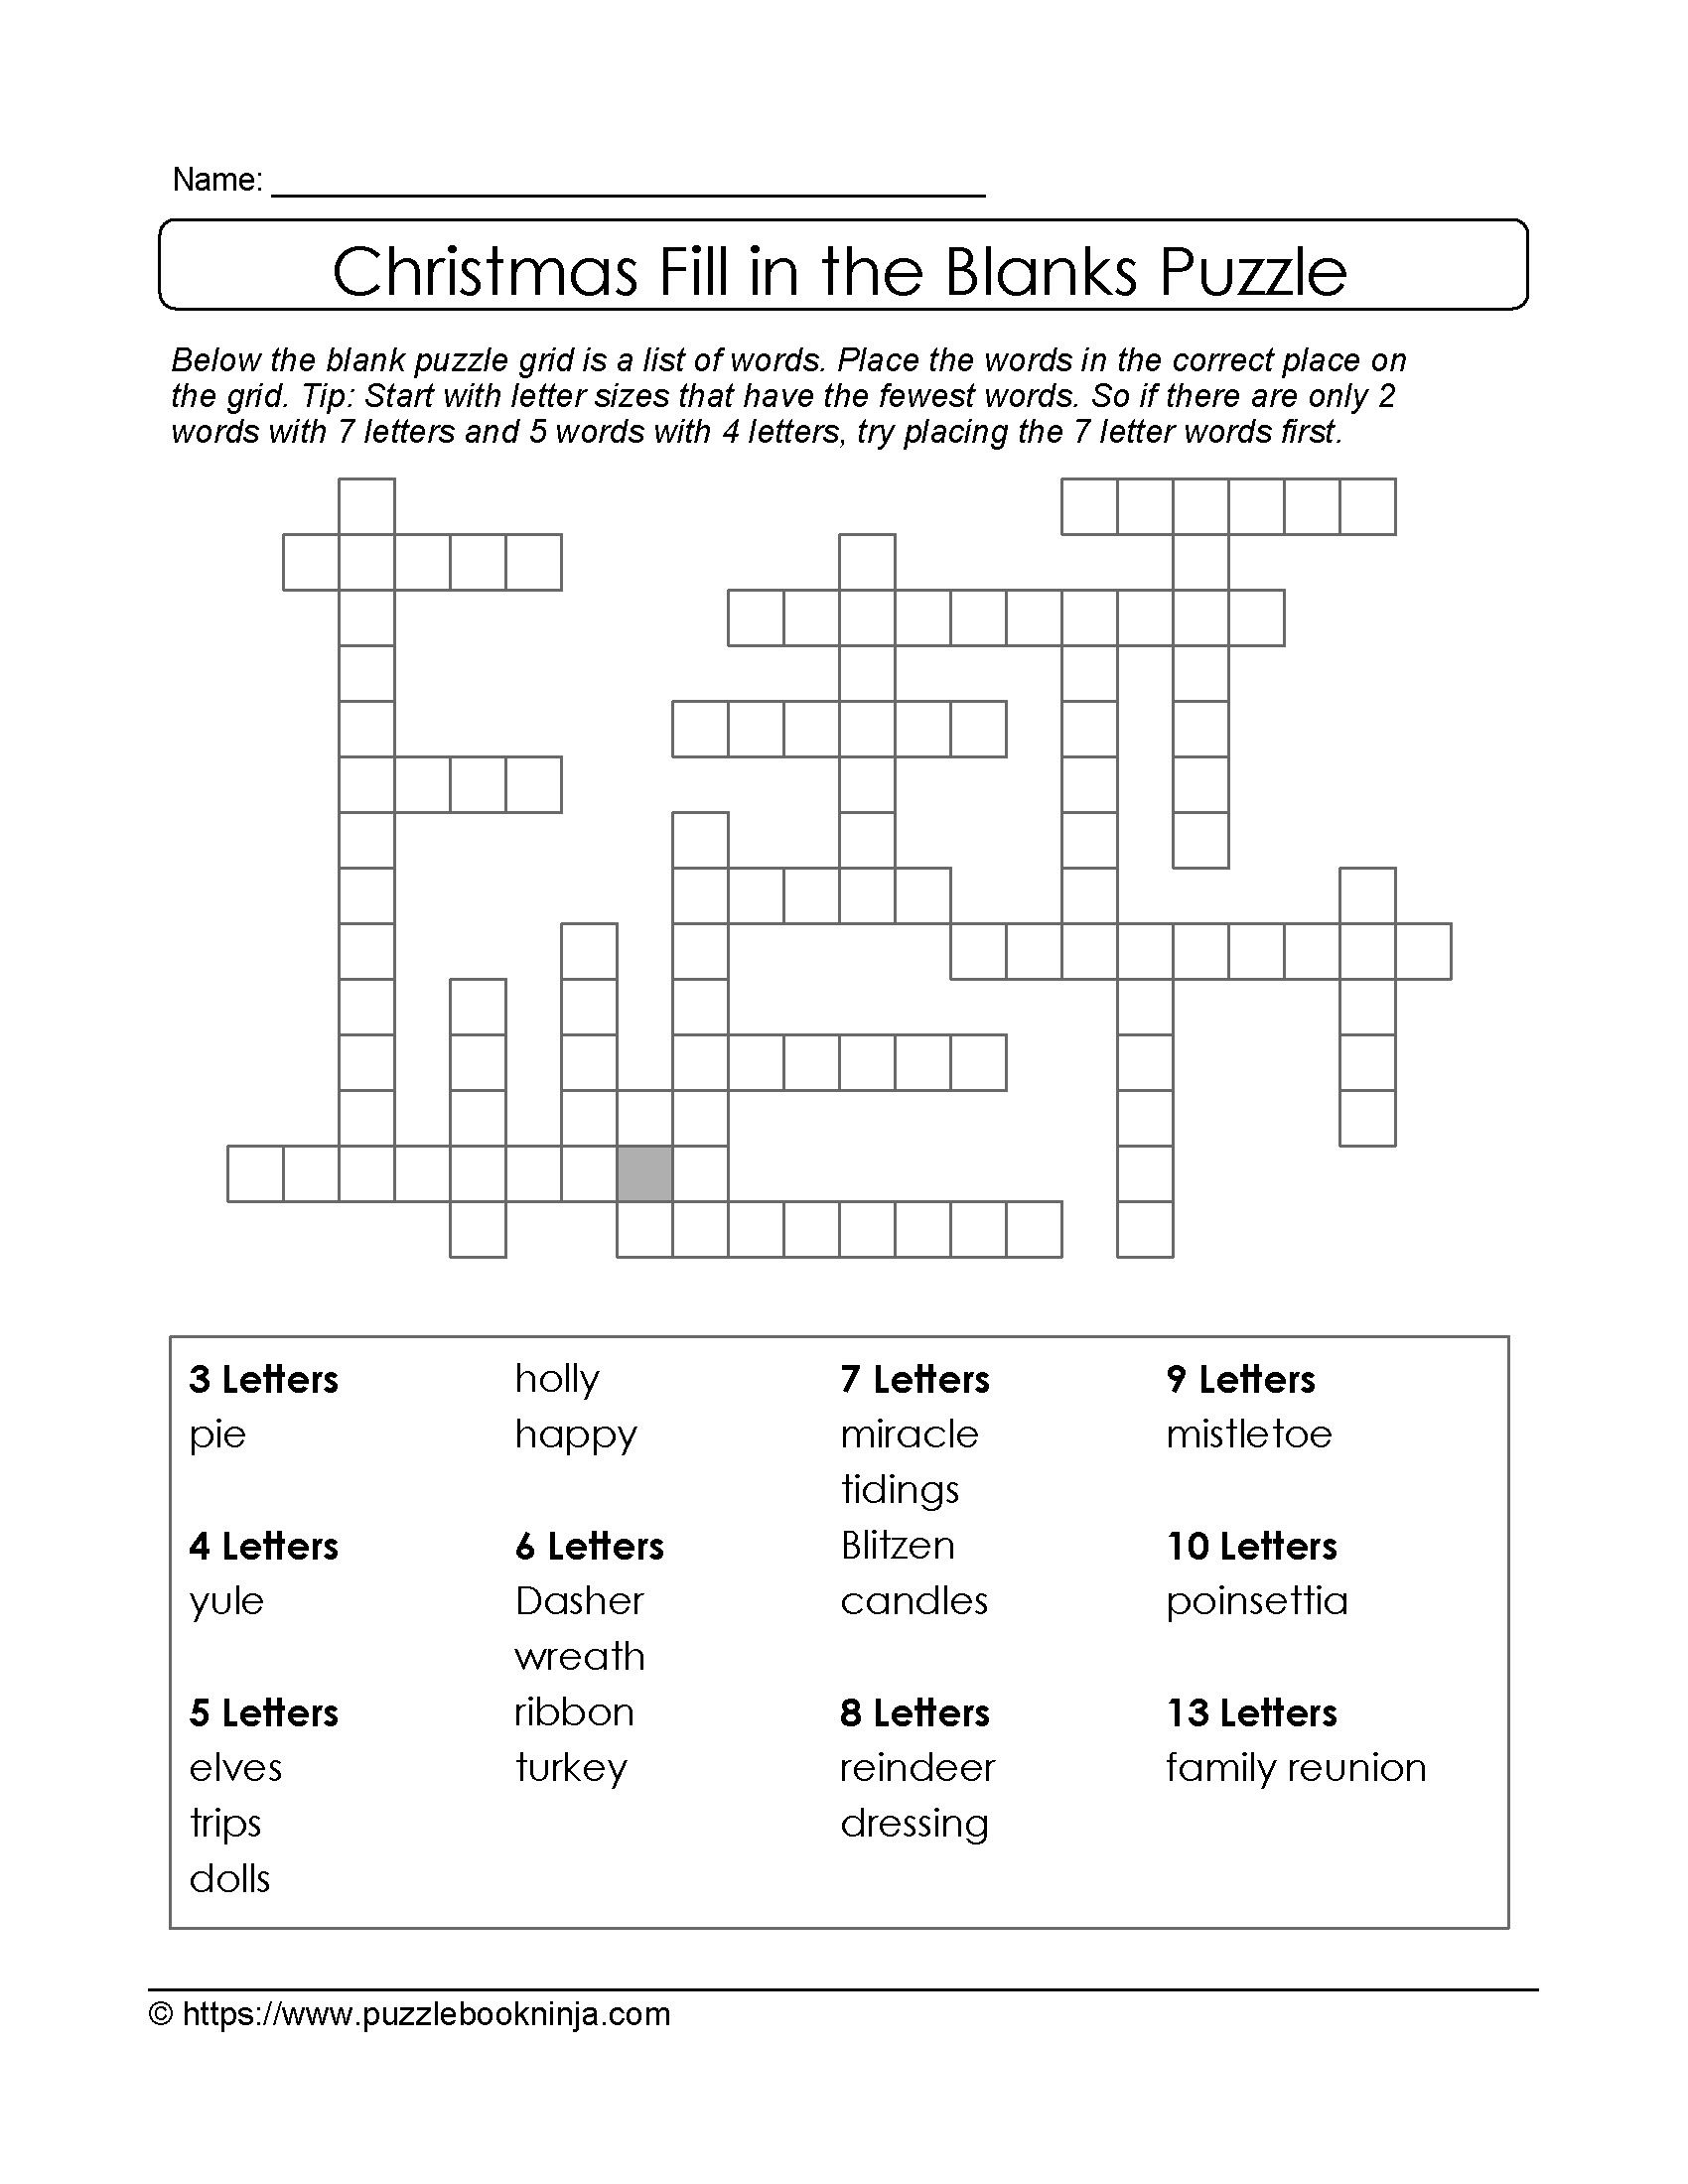 Puzzles To Print. Downloadable Christmas Puzzle. | Christmas Puzzles - Printable Science Puzzle